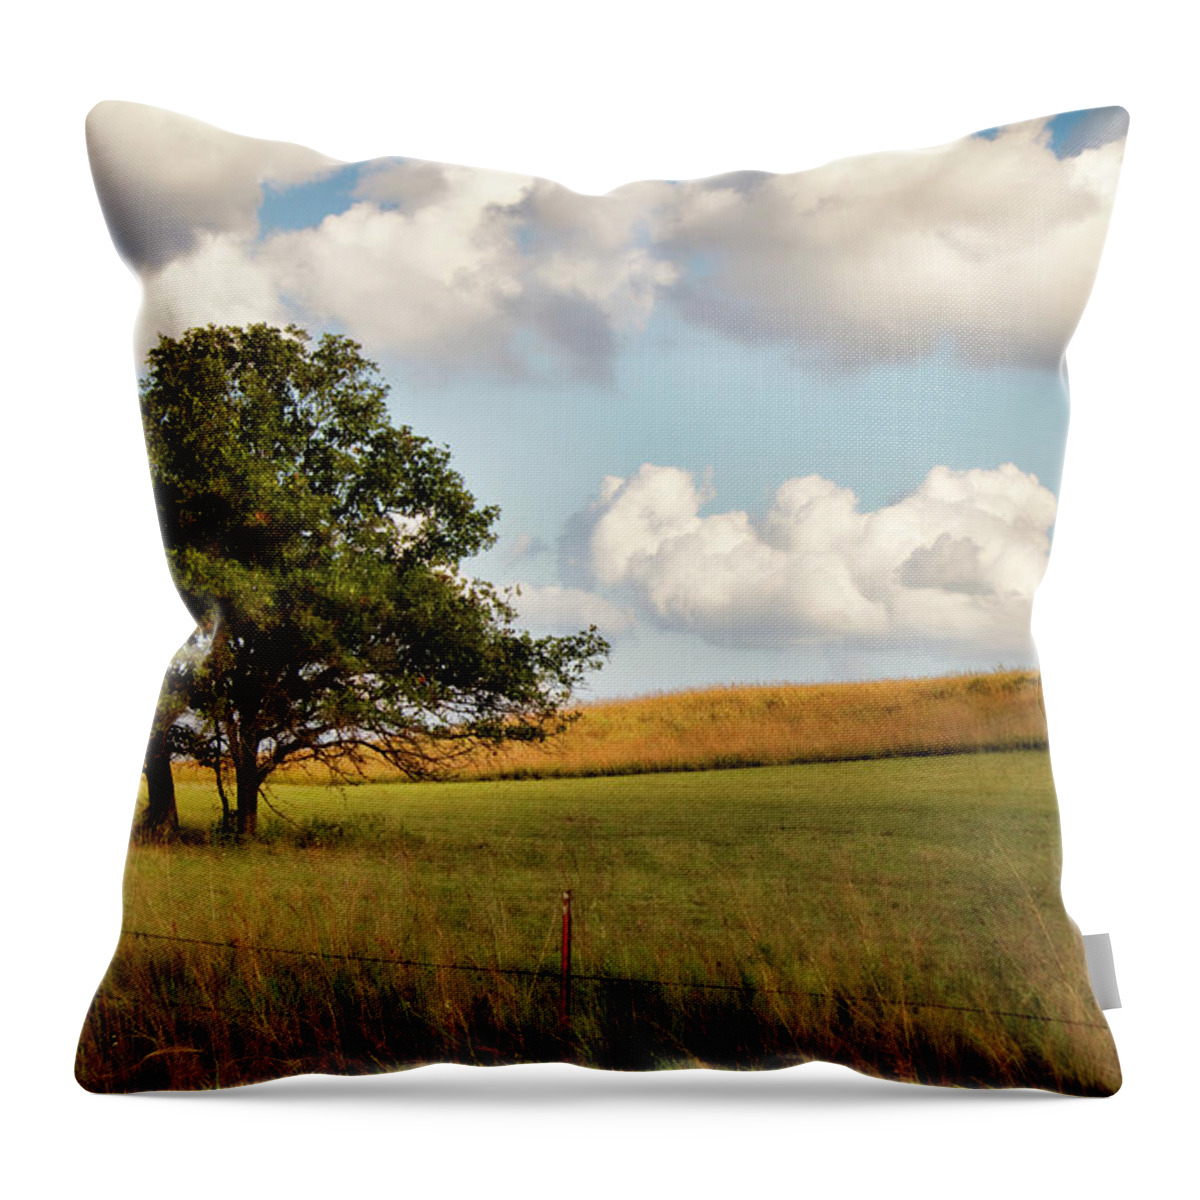 Creek County Throw Pillow featuring the photograph A Little Shade by Lana Trussell